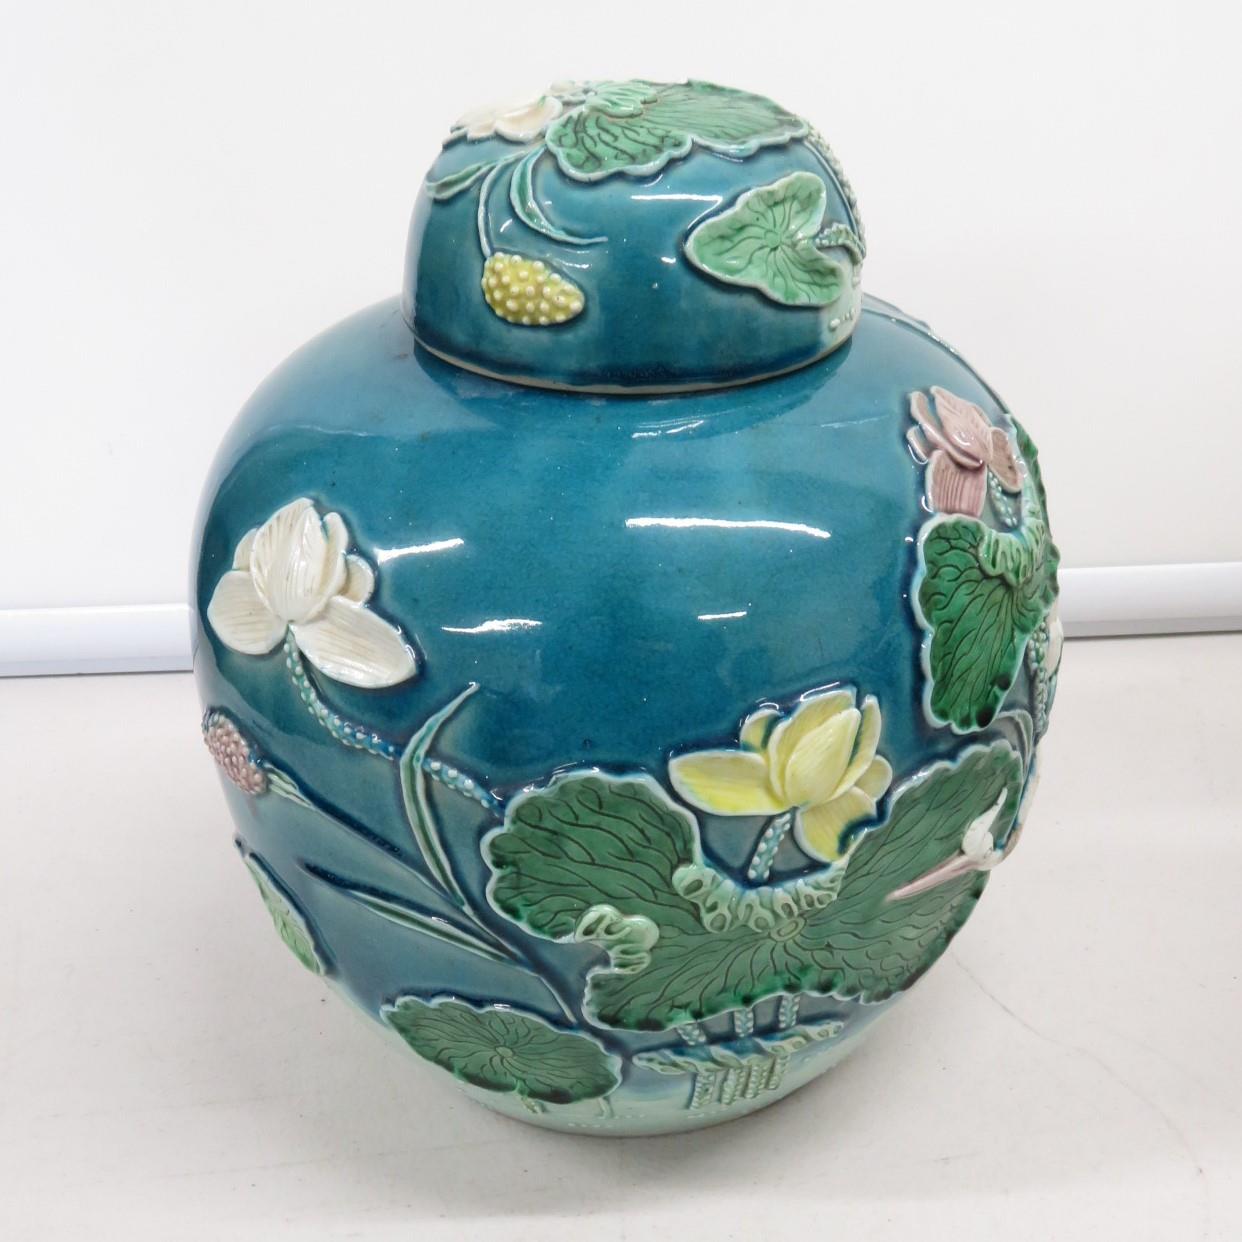 10" Chinese ginger jar with floral pattern